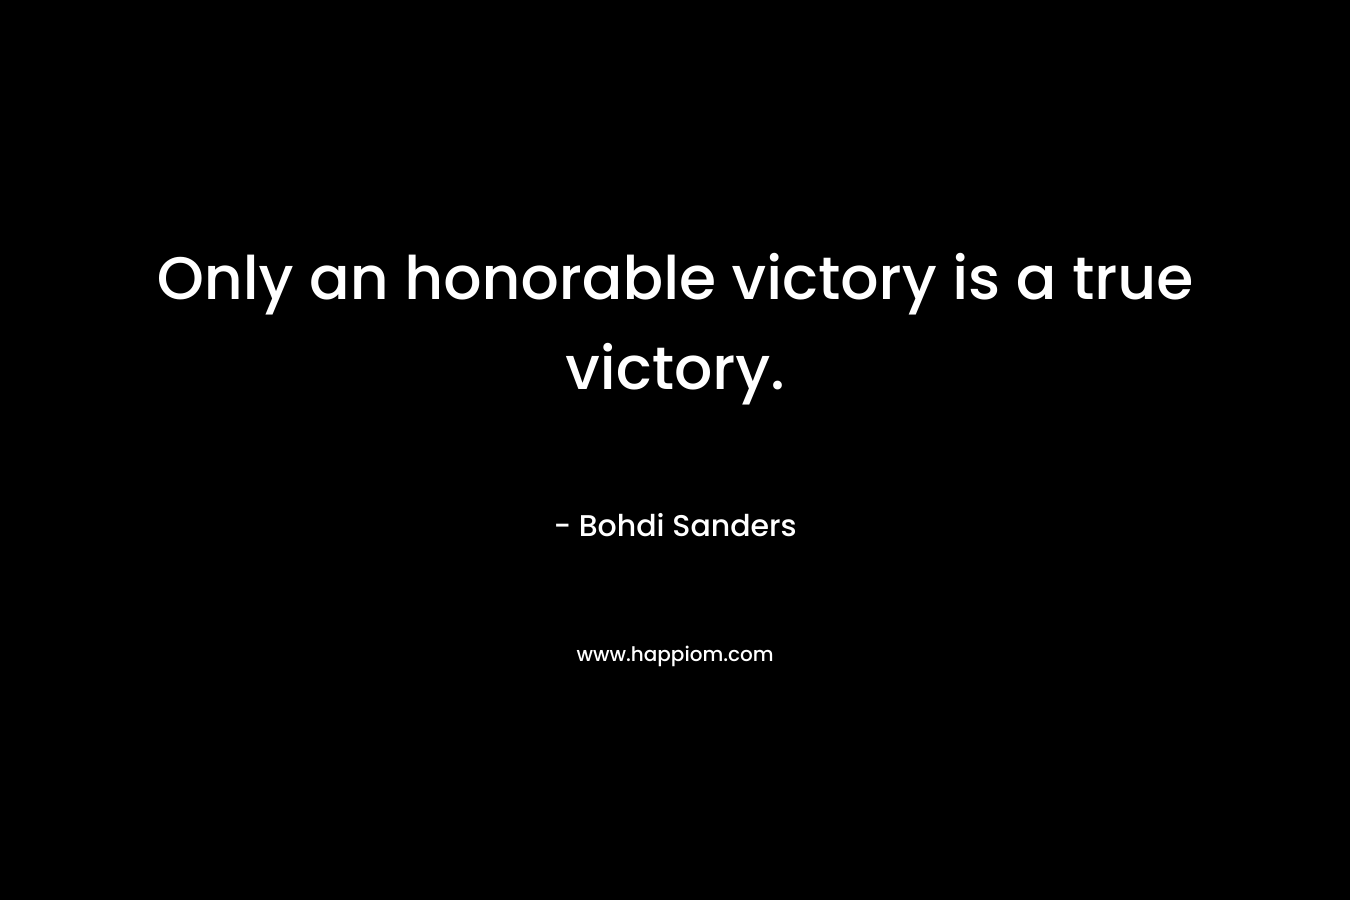 Only an honorable victory is a true victory.